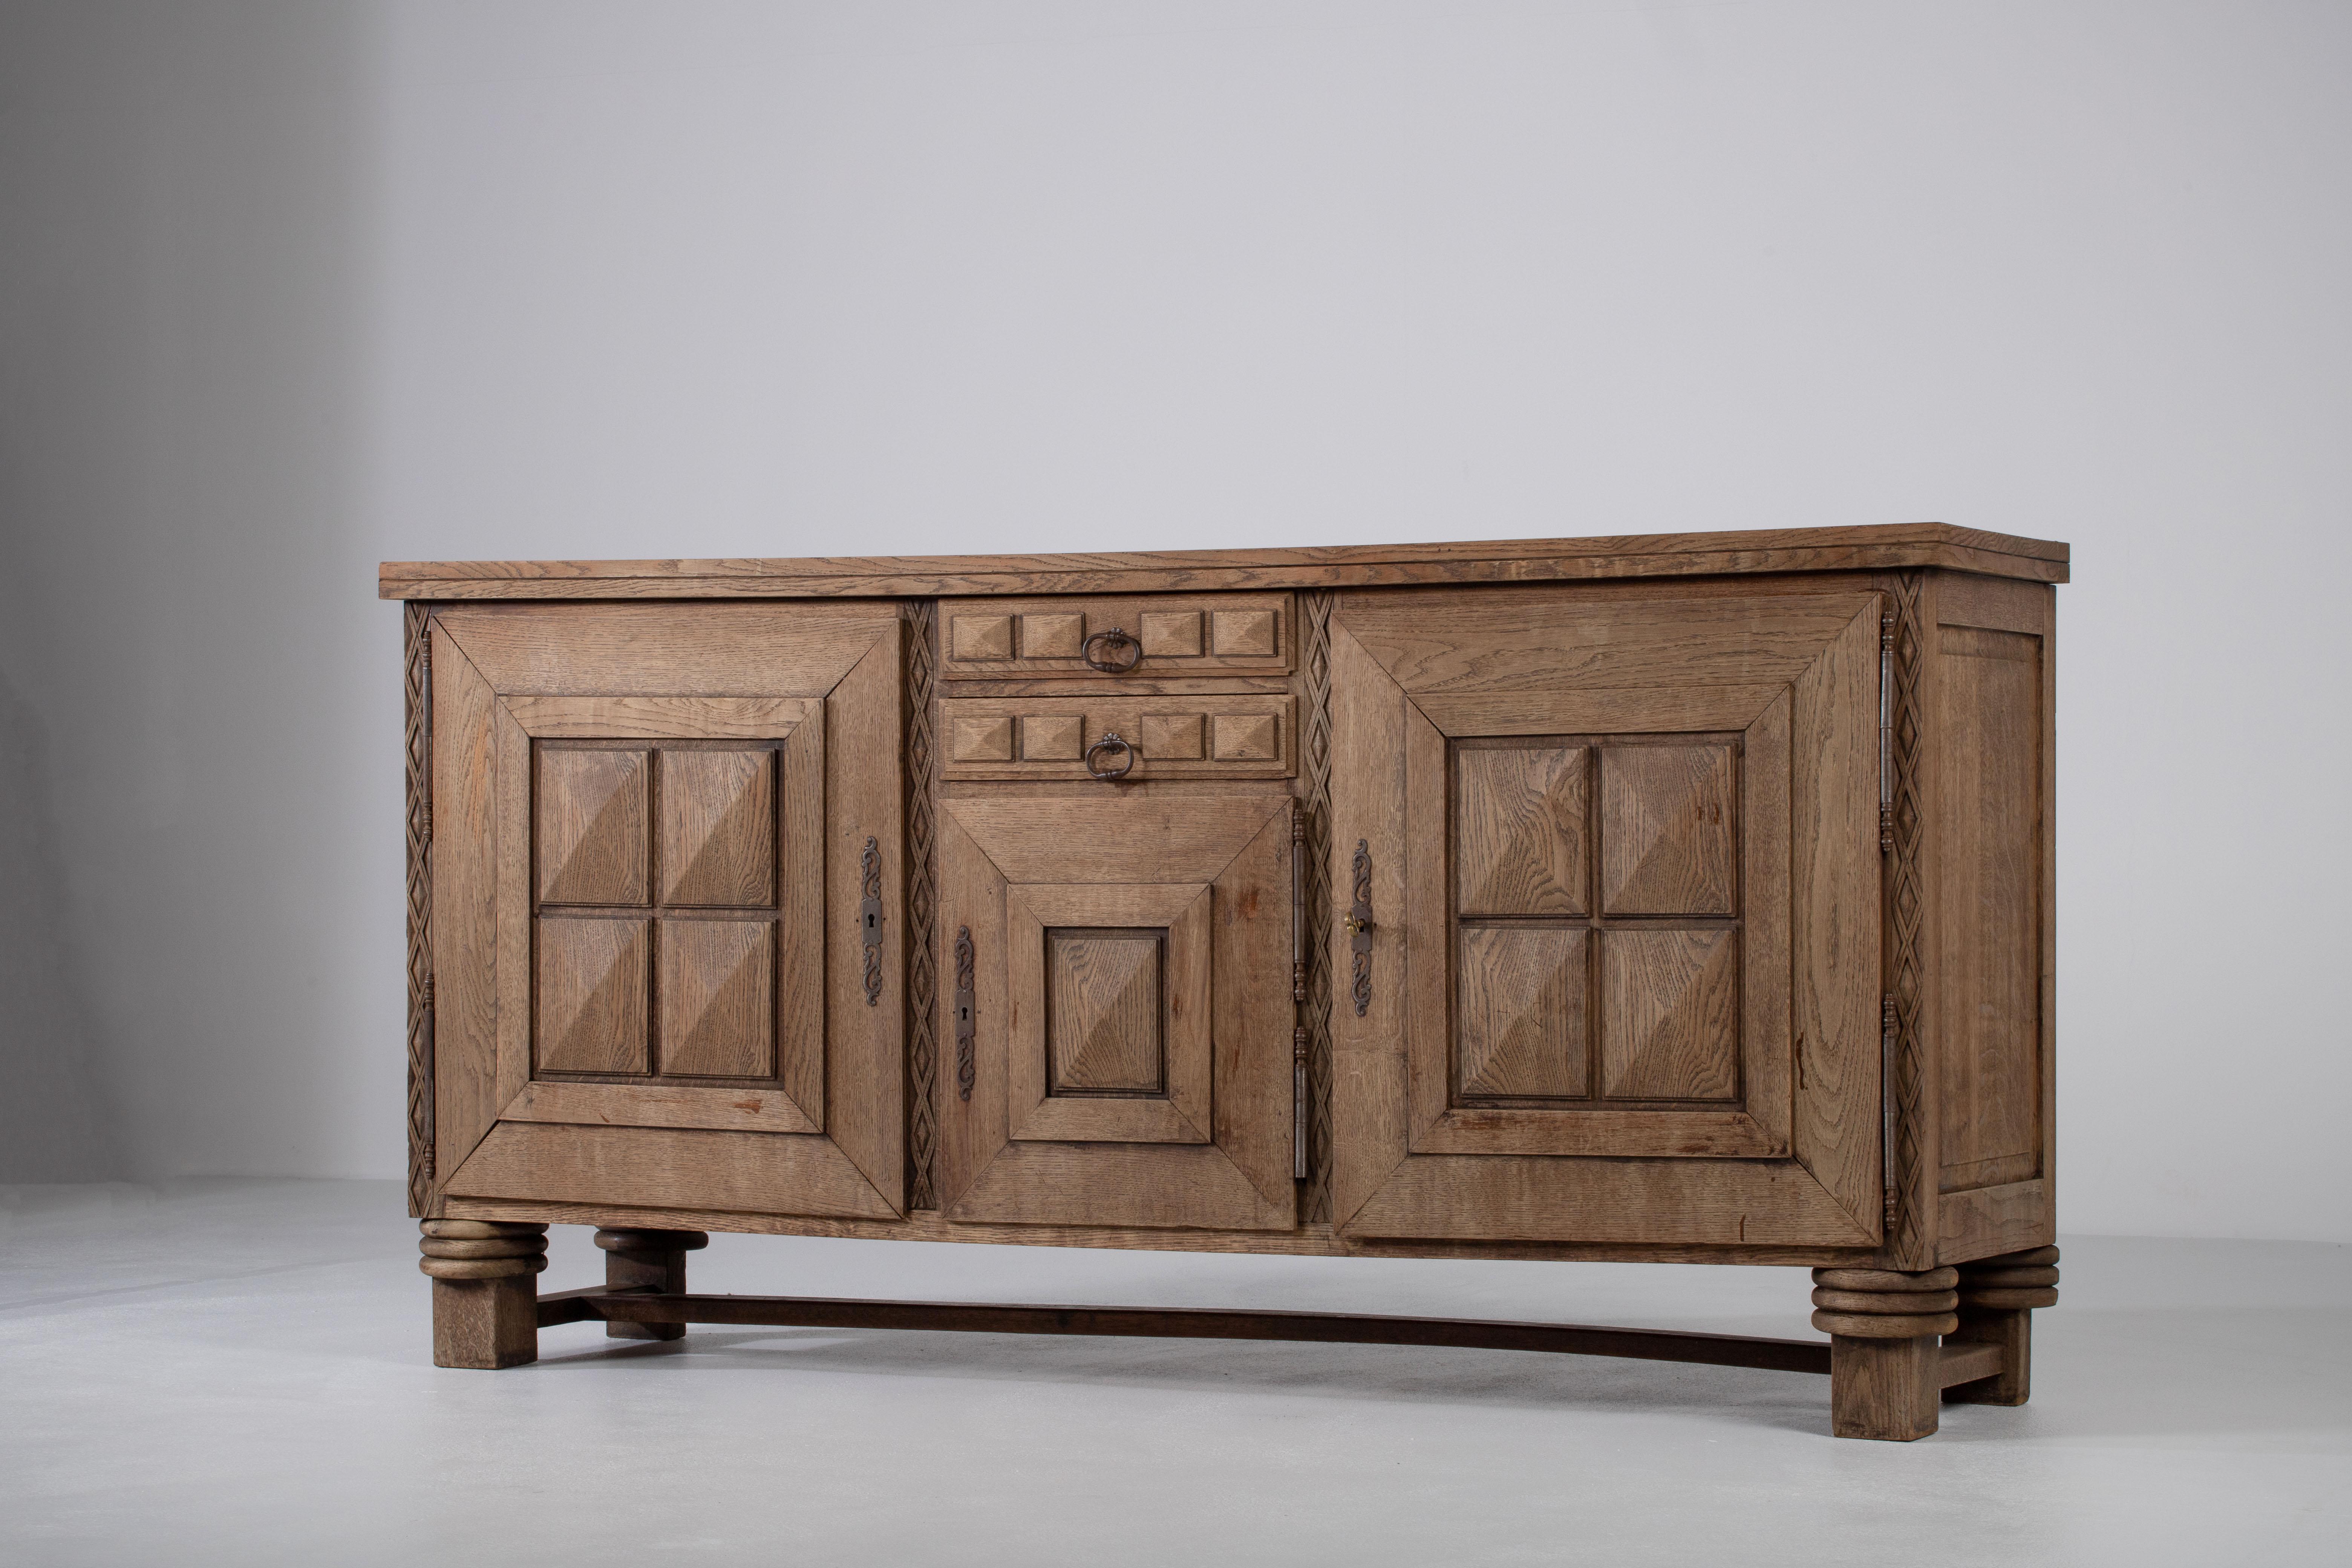 Bleached Solid Oak Credenza with Graphic Details, France, 1940s For Sale 9